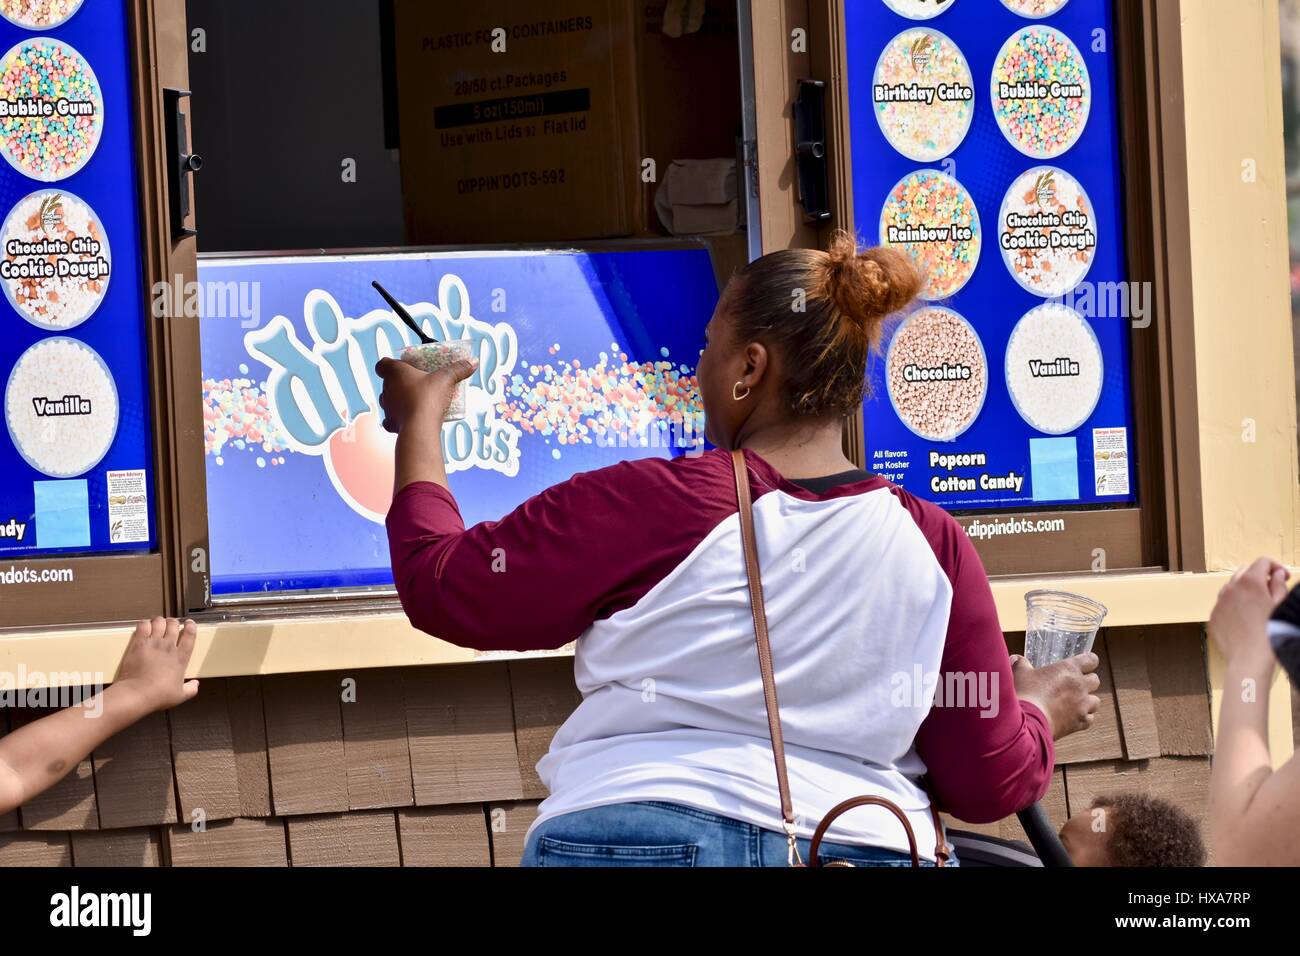 https://c8.alamy.com/comp/HXA7RP/customers-getting-dippin-dots-on-a-hot-day-HXA7RP.jpg